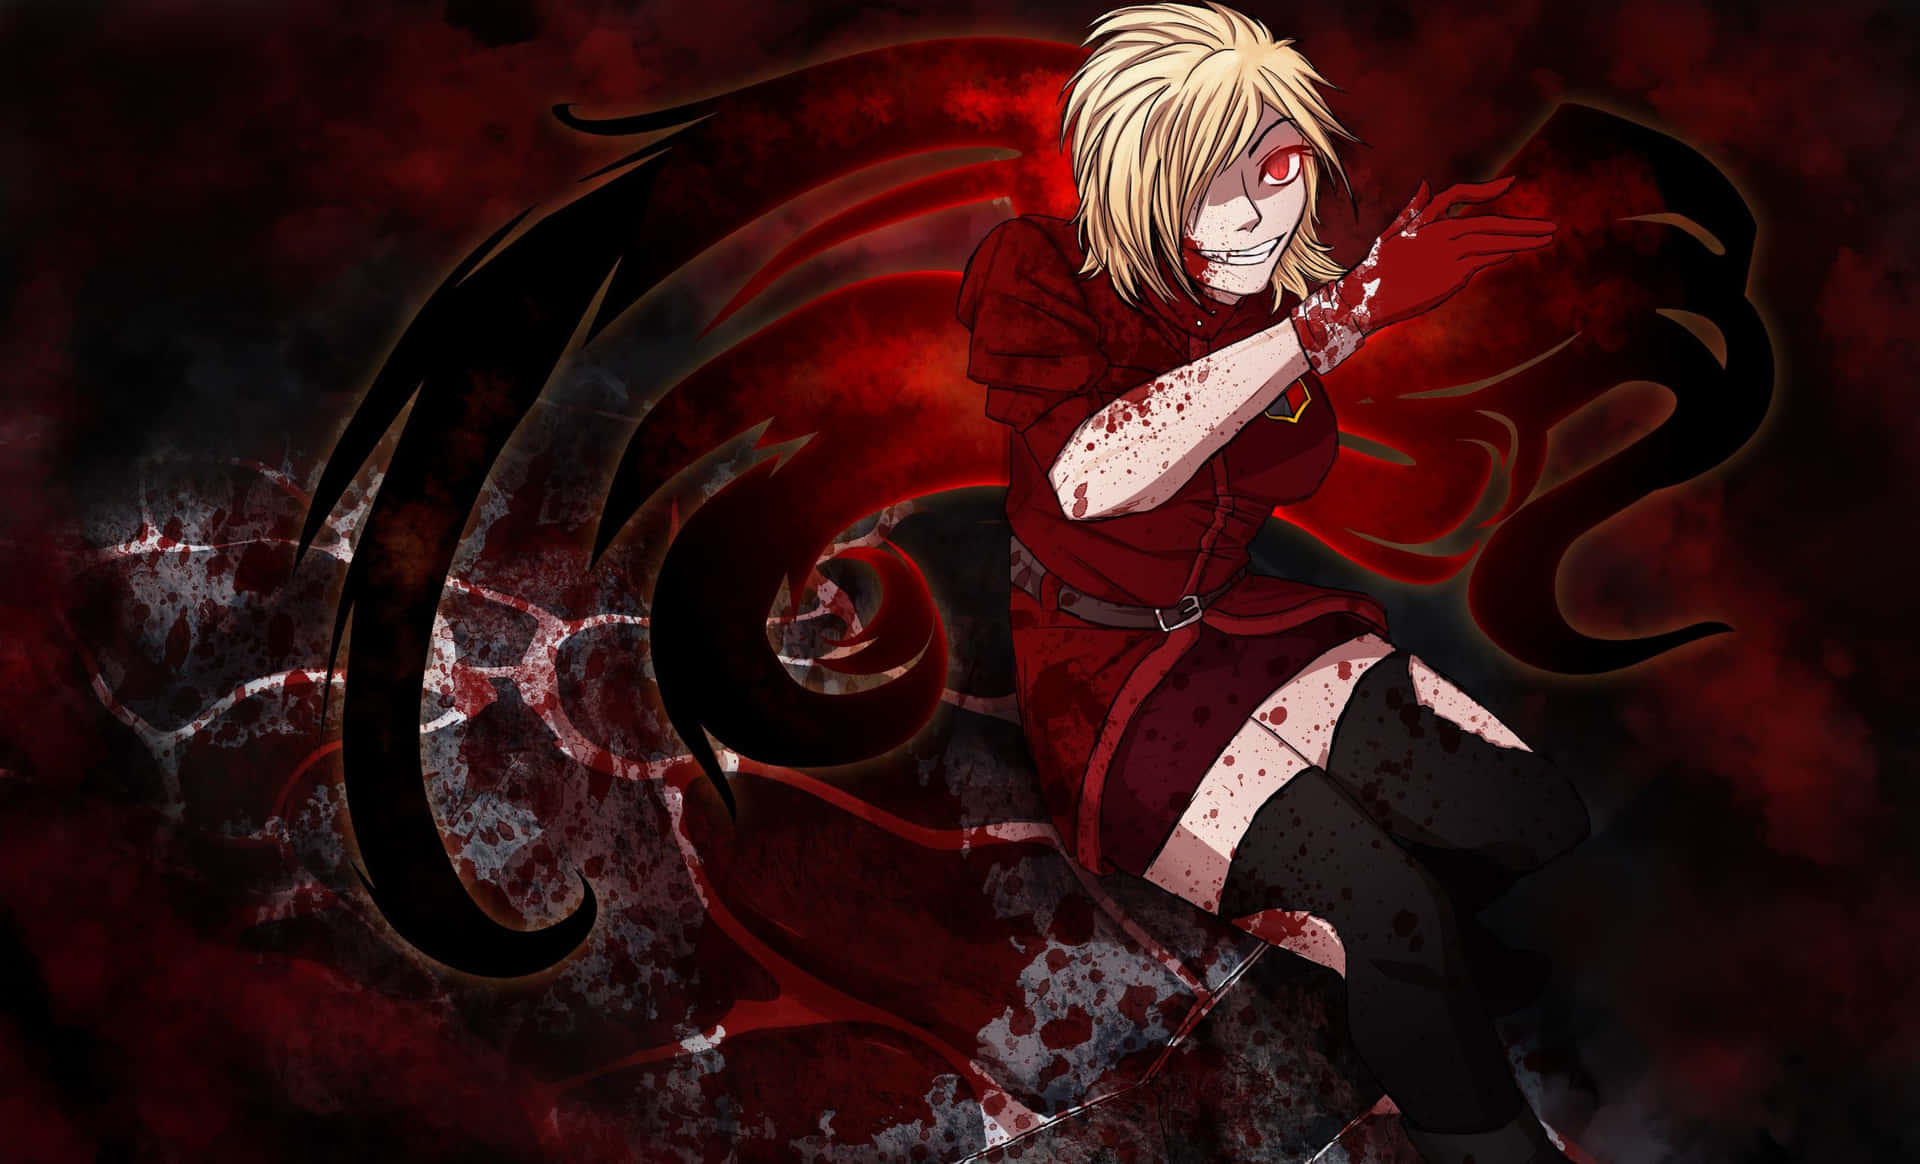 Captivating Hellsing Anime Character In Action Wallpaper